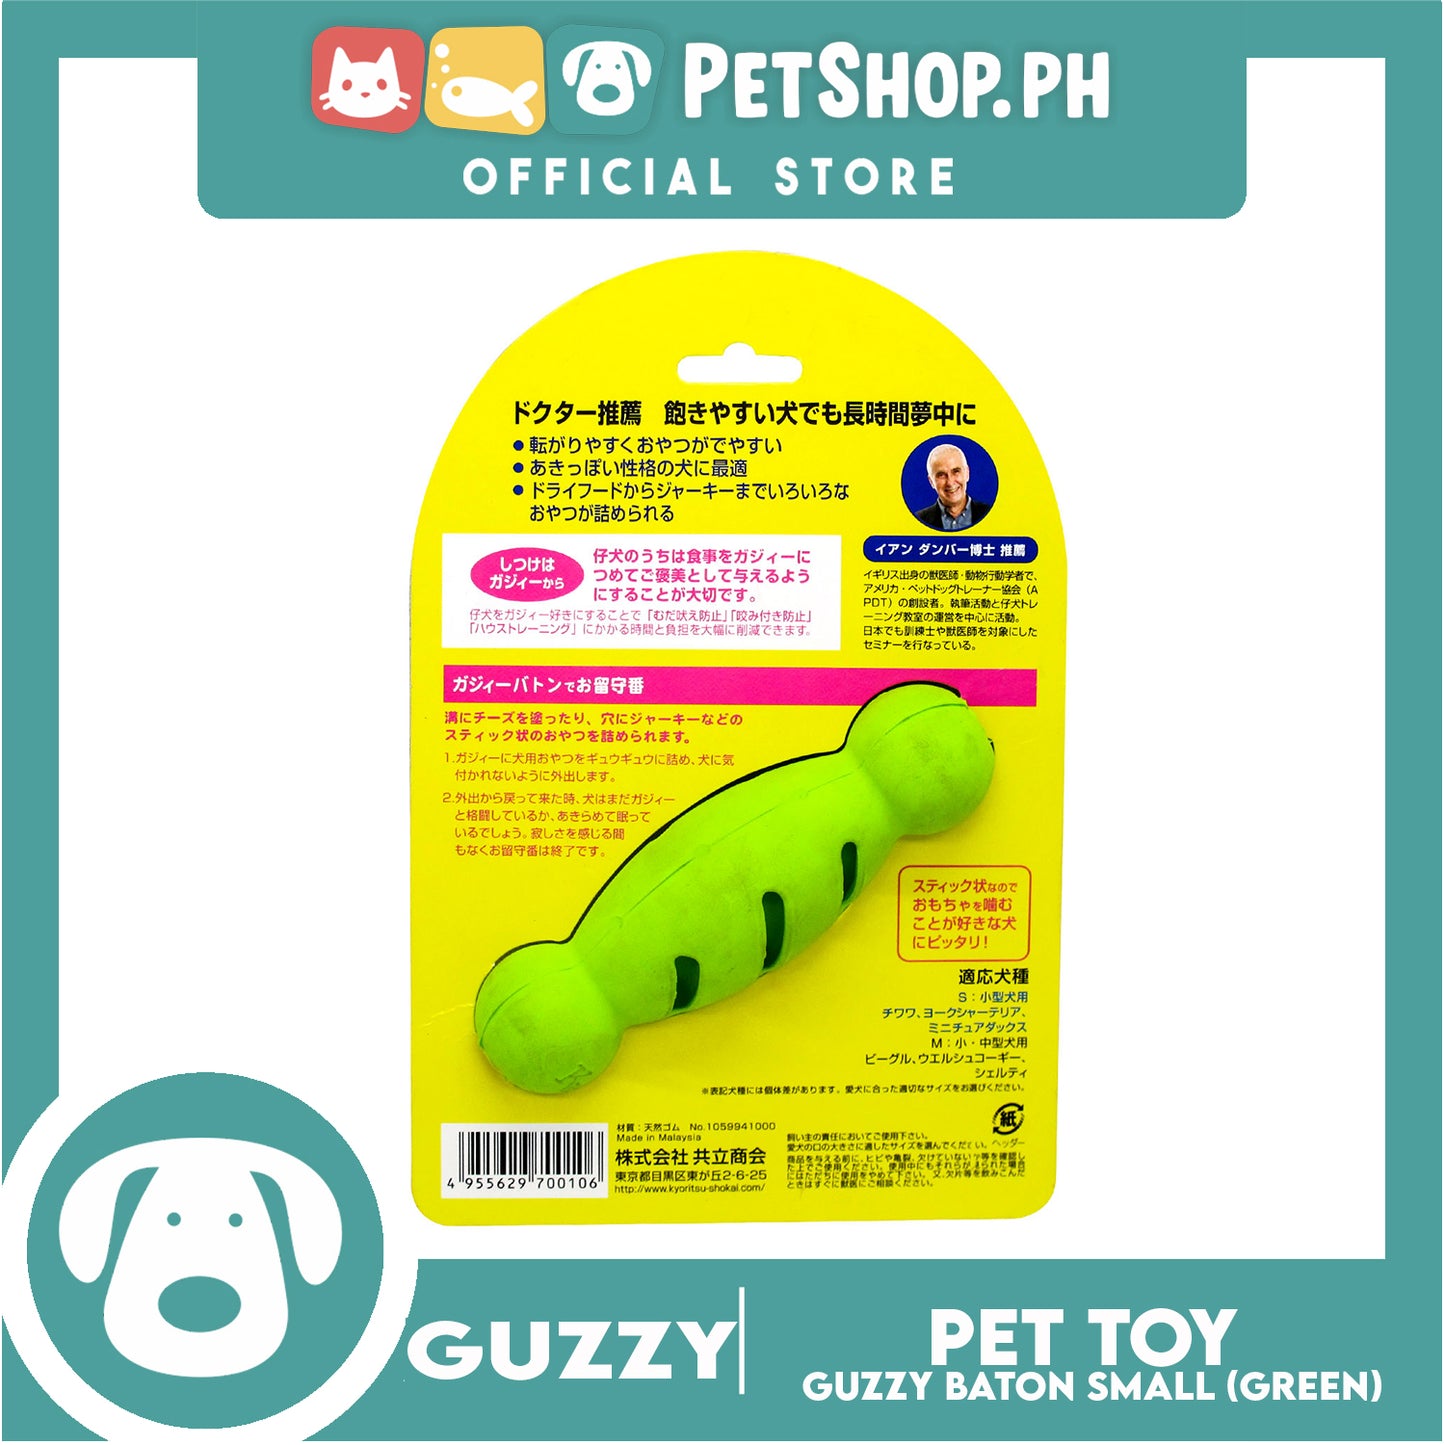 Guzzy Baton Puppy Training Toy, Green Color (Small) Mixing Training, Play And Snack Time, Puppy Treat